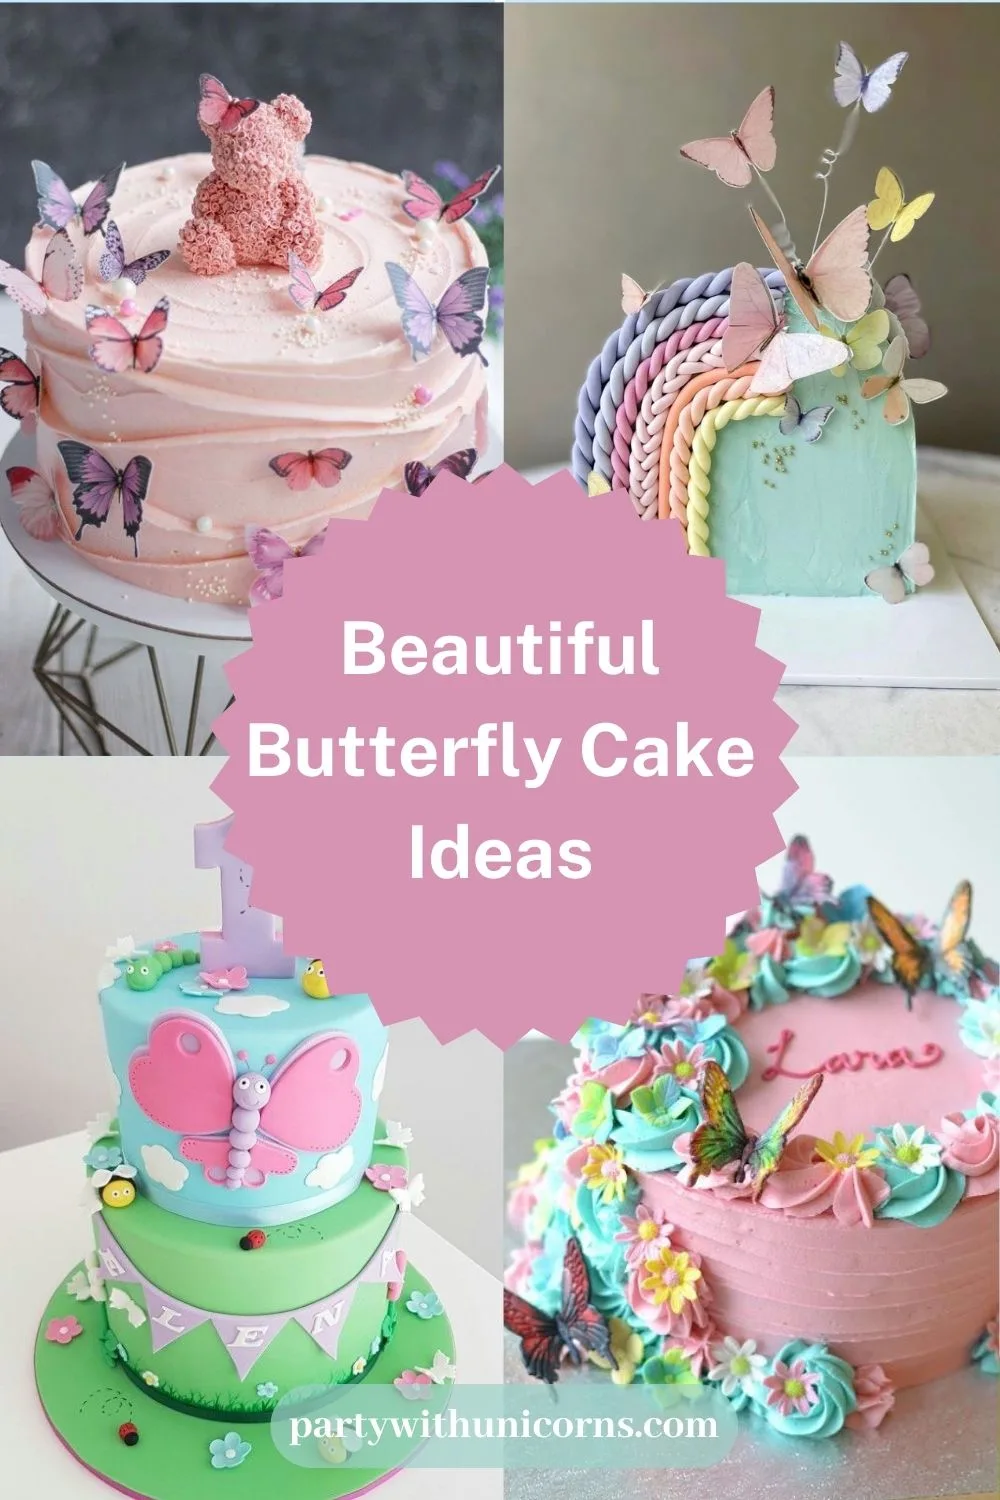 20 Beautiful Butterfly Party Cake Ideas - Party with Unicorns